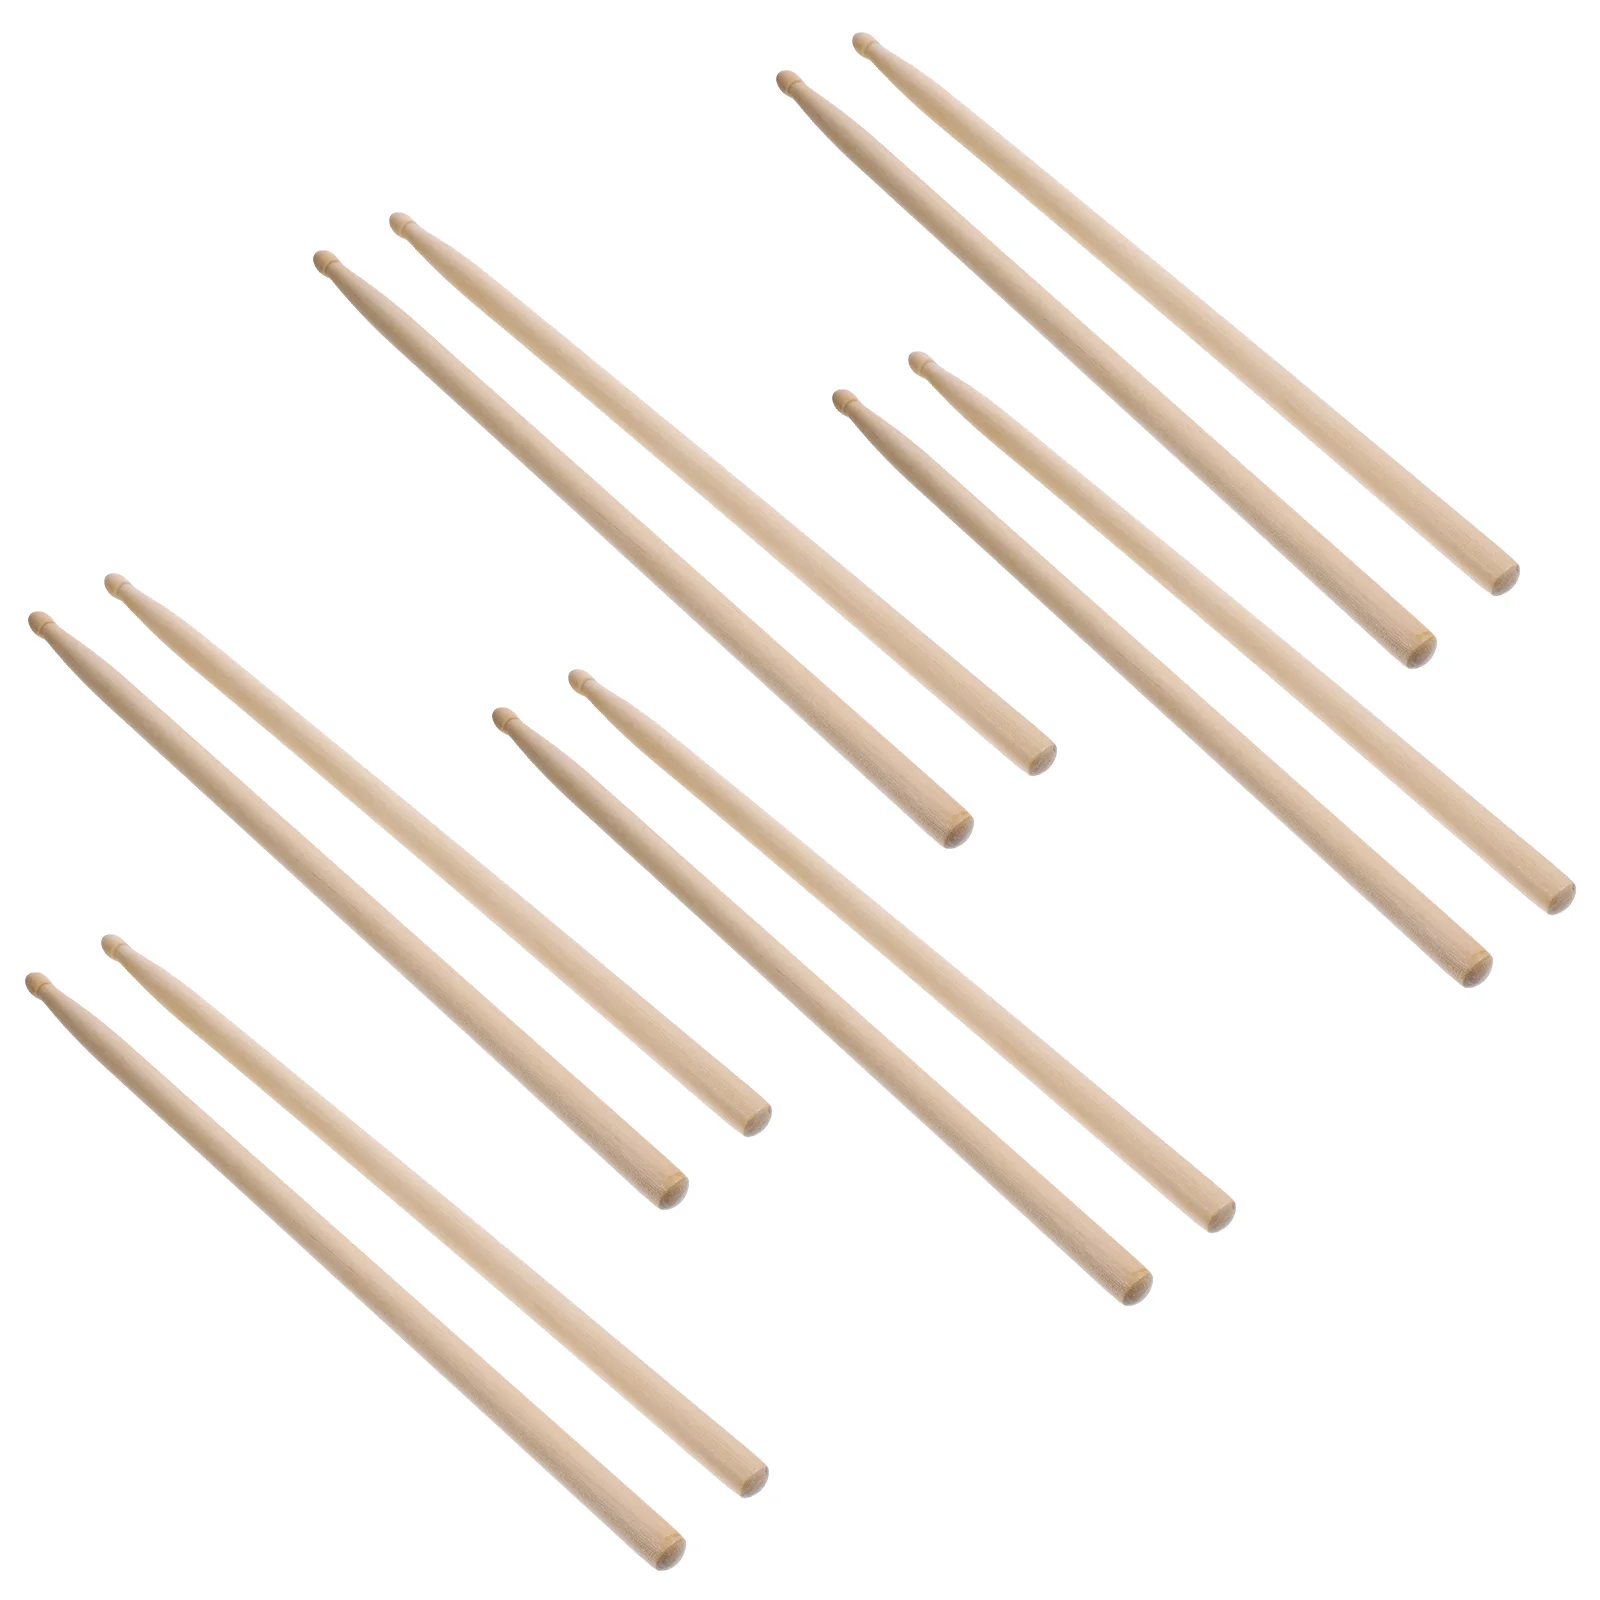 Instrument Mallets 5a Maple Wood Sticks Musical Instruments Drumsticks For Practice percussion sticks wood mallets musical instrument percussion accessories for energy chime wood block